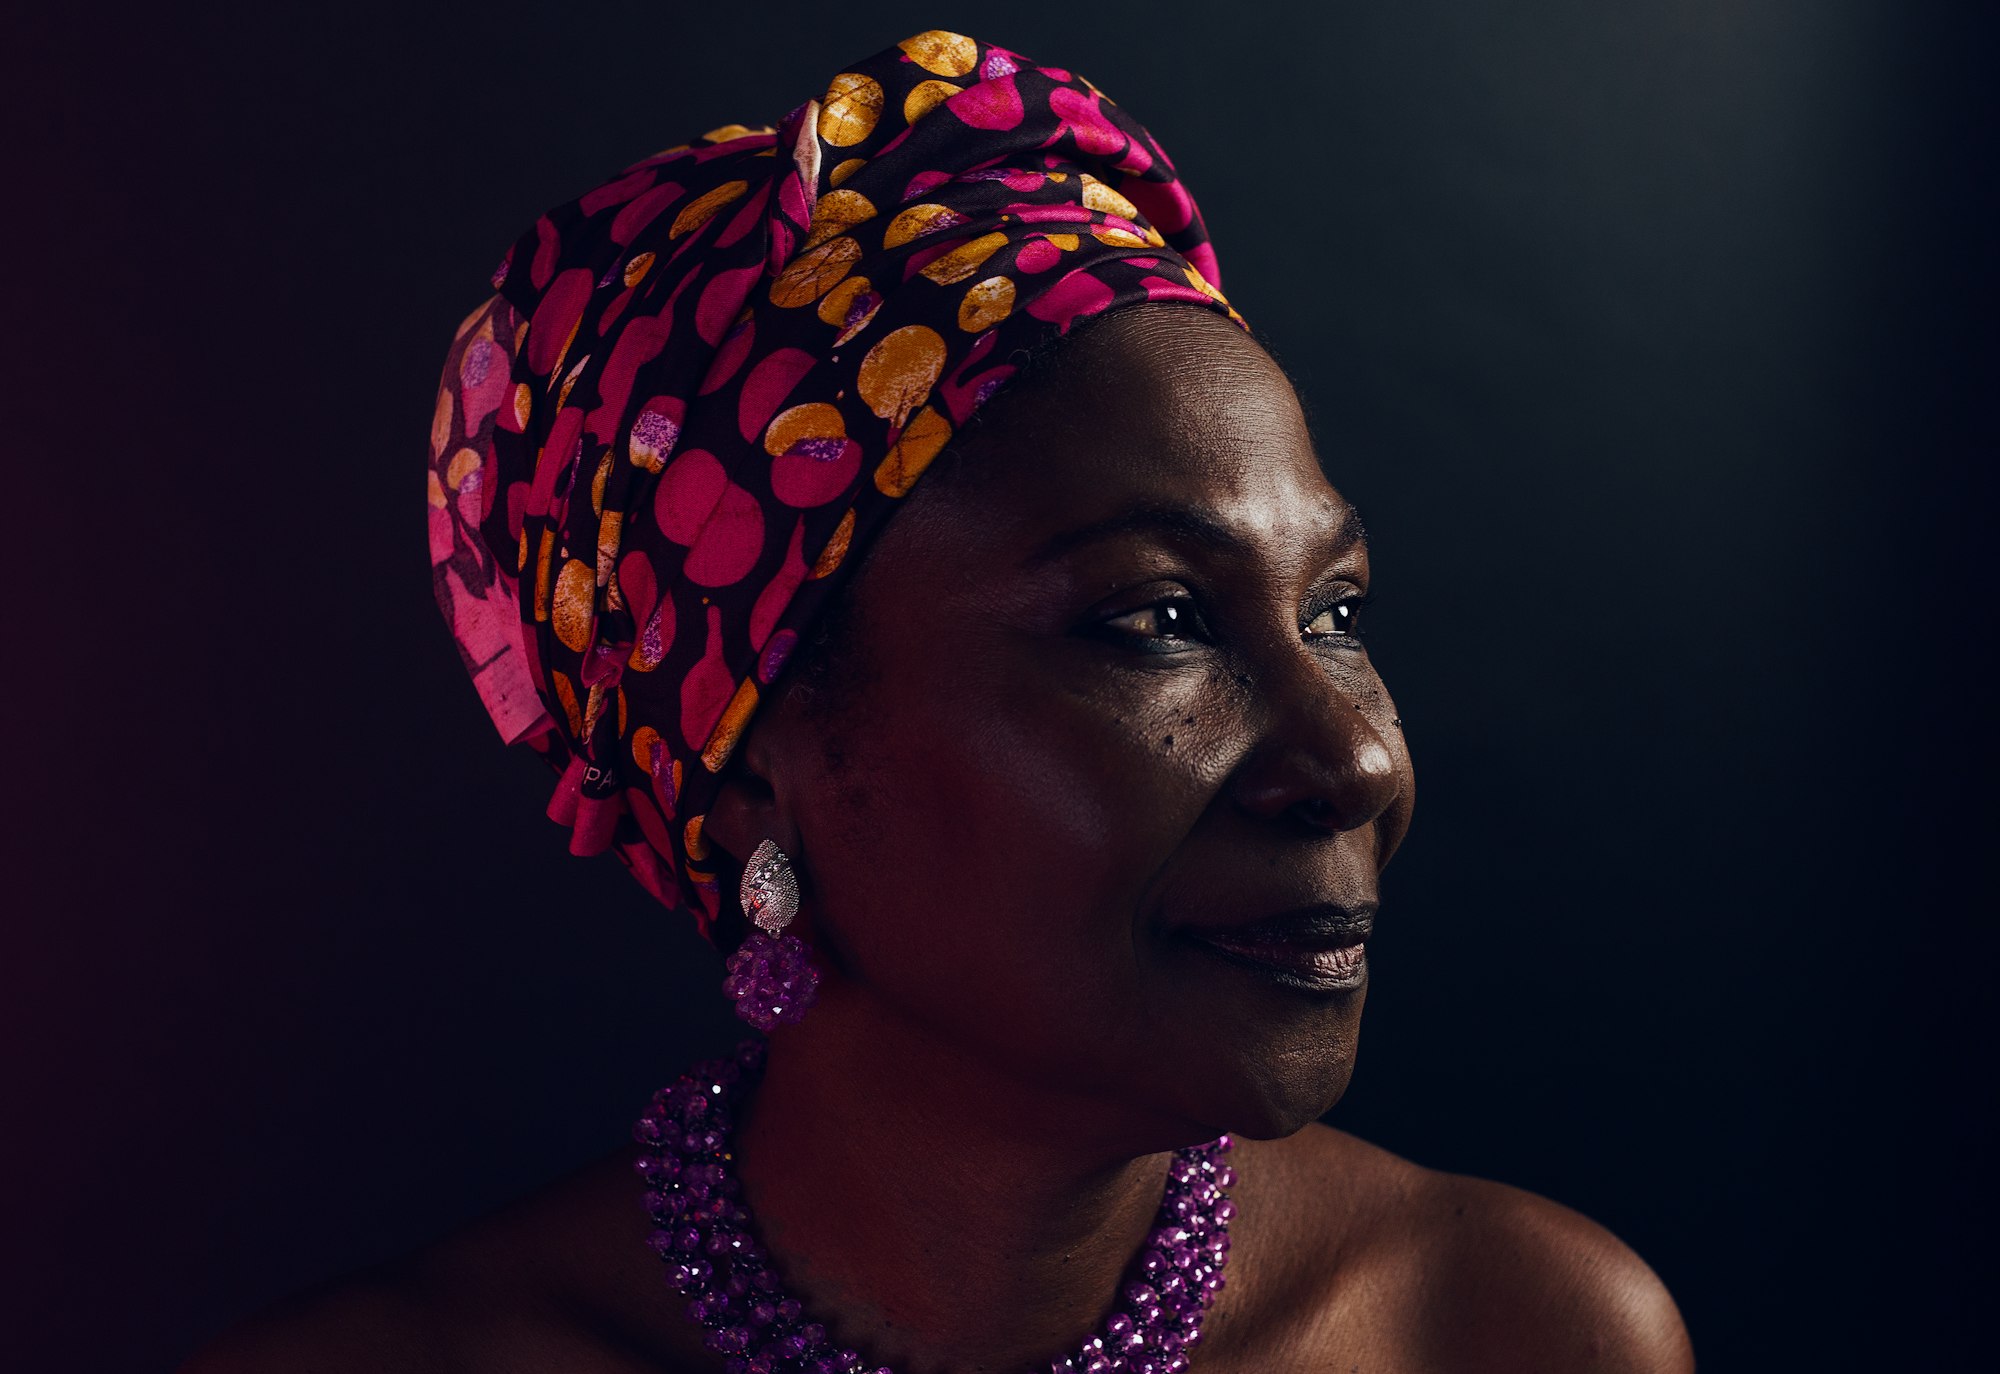 my mom just came to America from Nigeria. she makes jewelry so i wanted to capture her with some of her work on